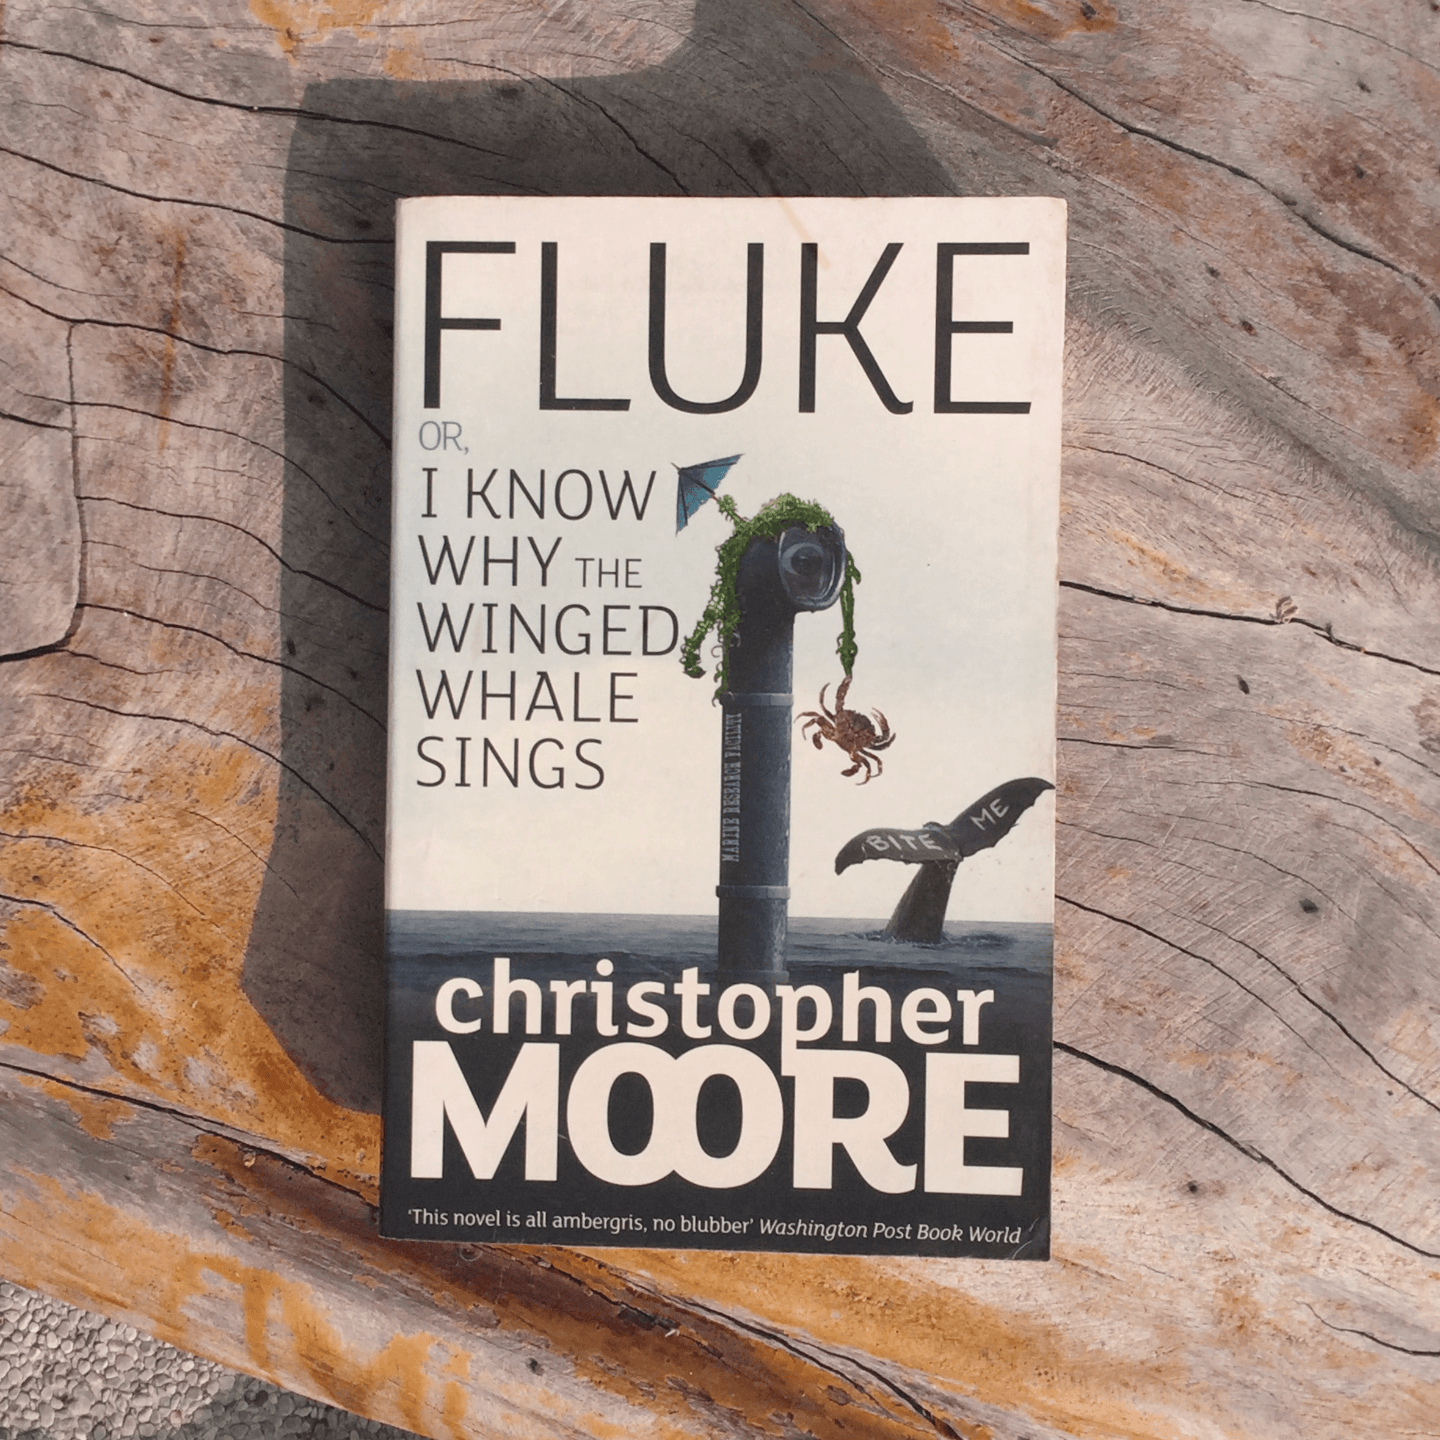 Fluke or, I Know Why the Winged Whale Sings by Christopher Moore [Paperback]